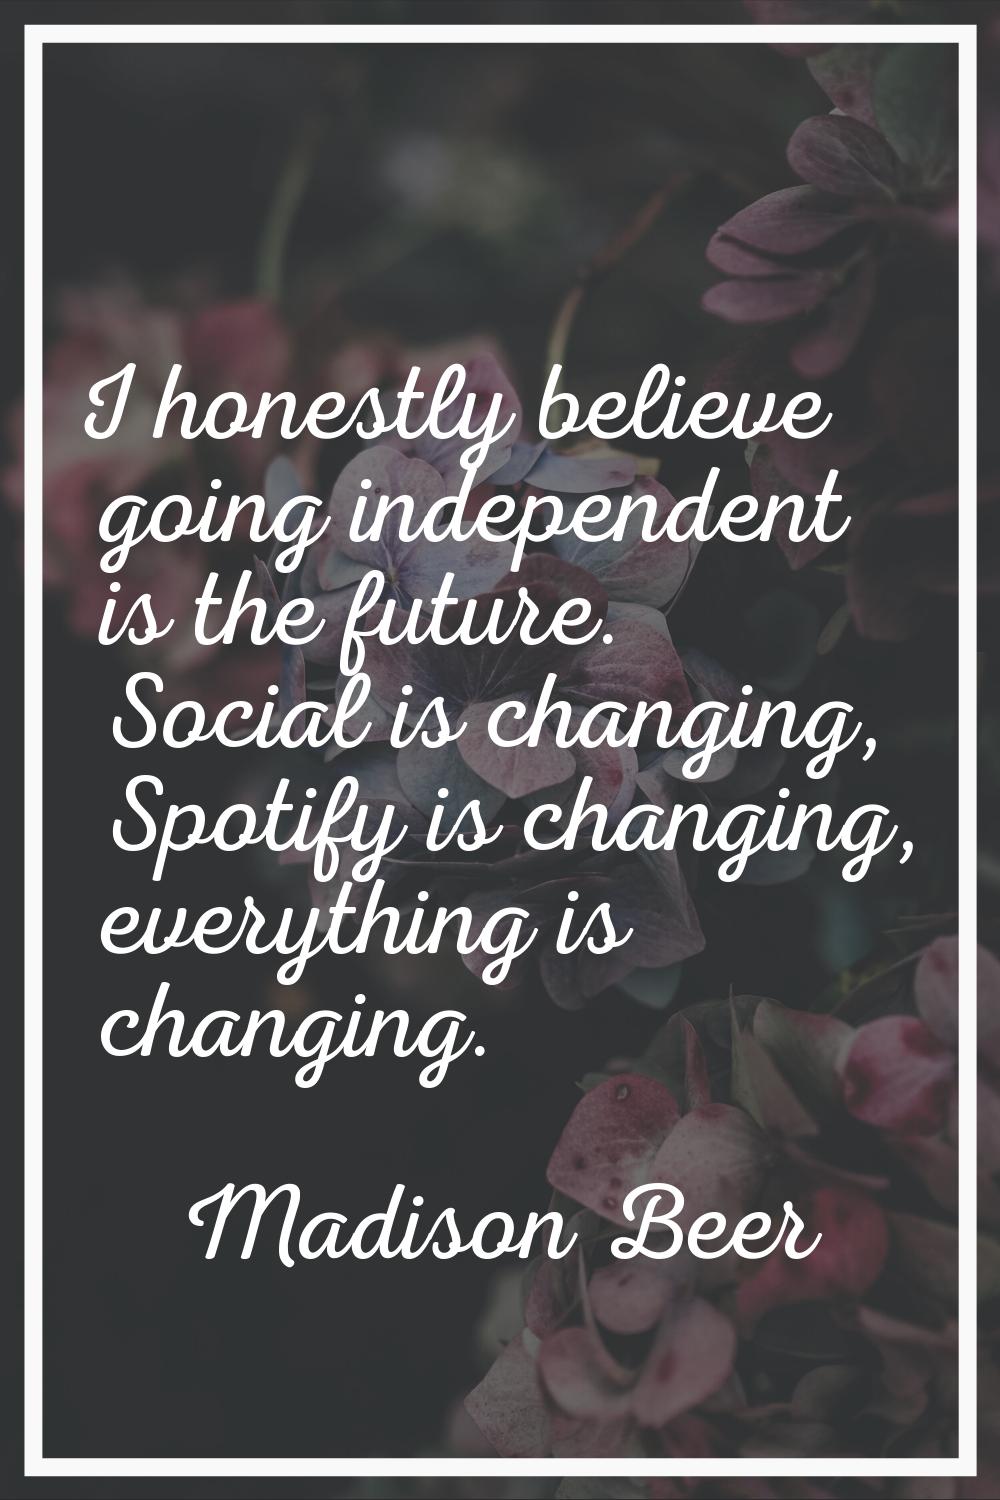 I honestly believe going independent is the future. Social is changing, Spotify is changing, everyt